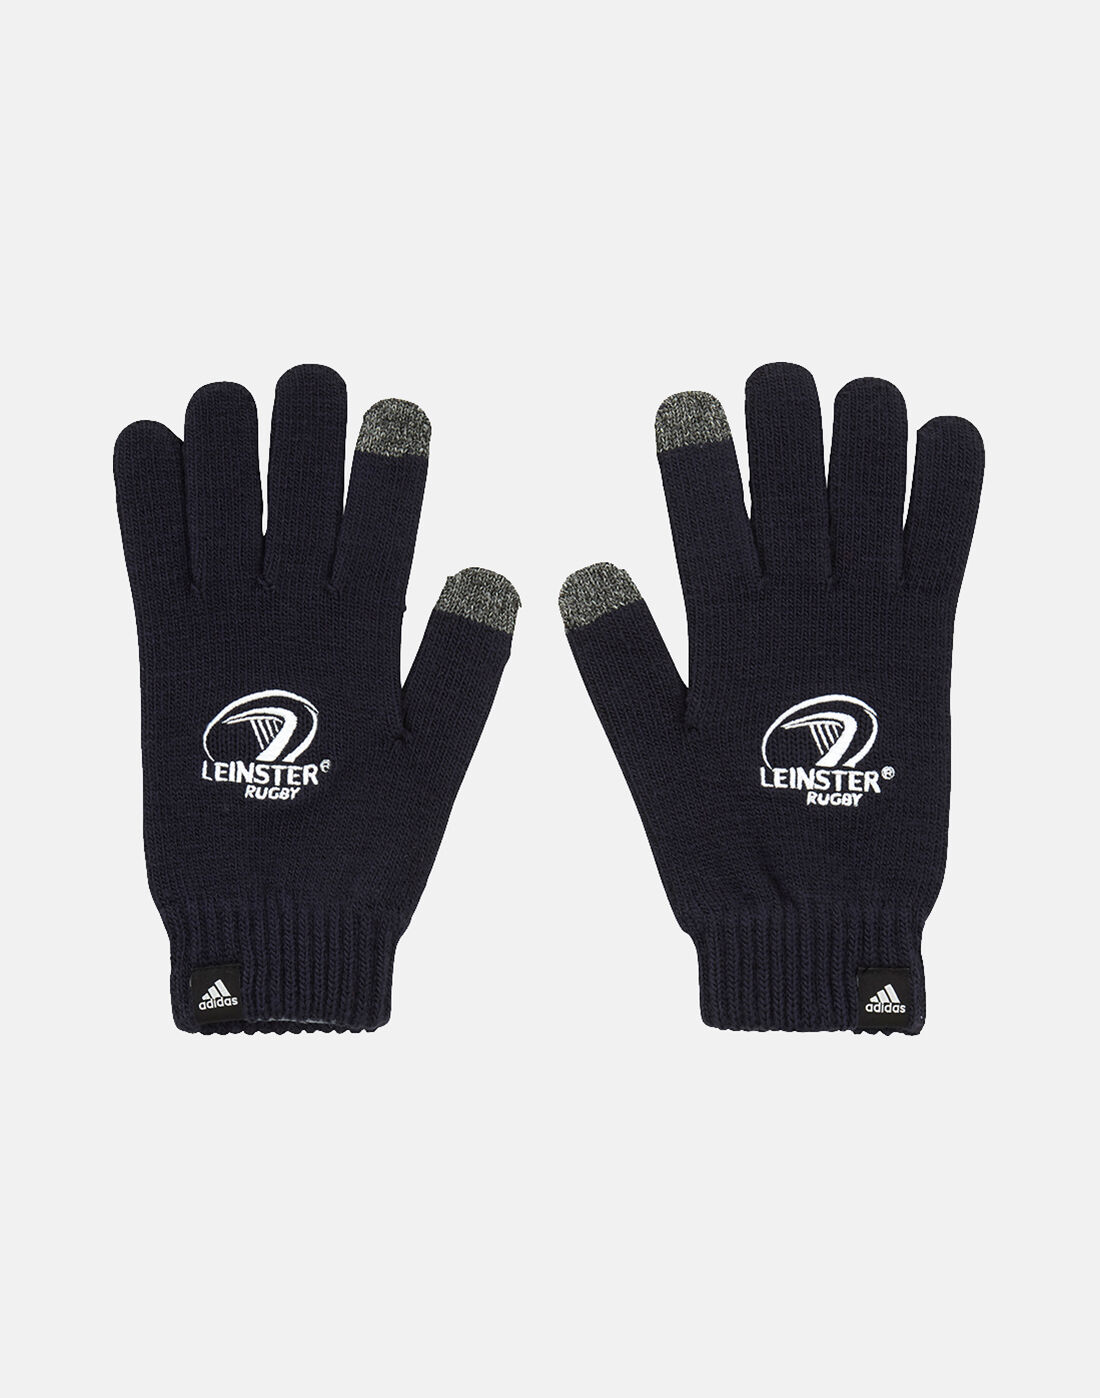 nike gloves shoes 2019